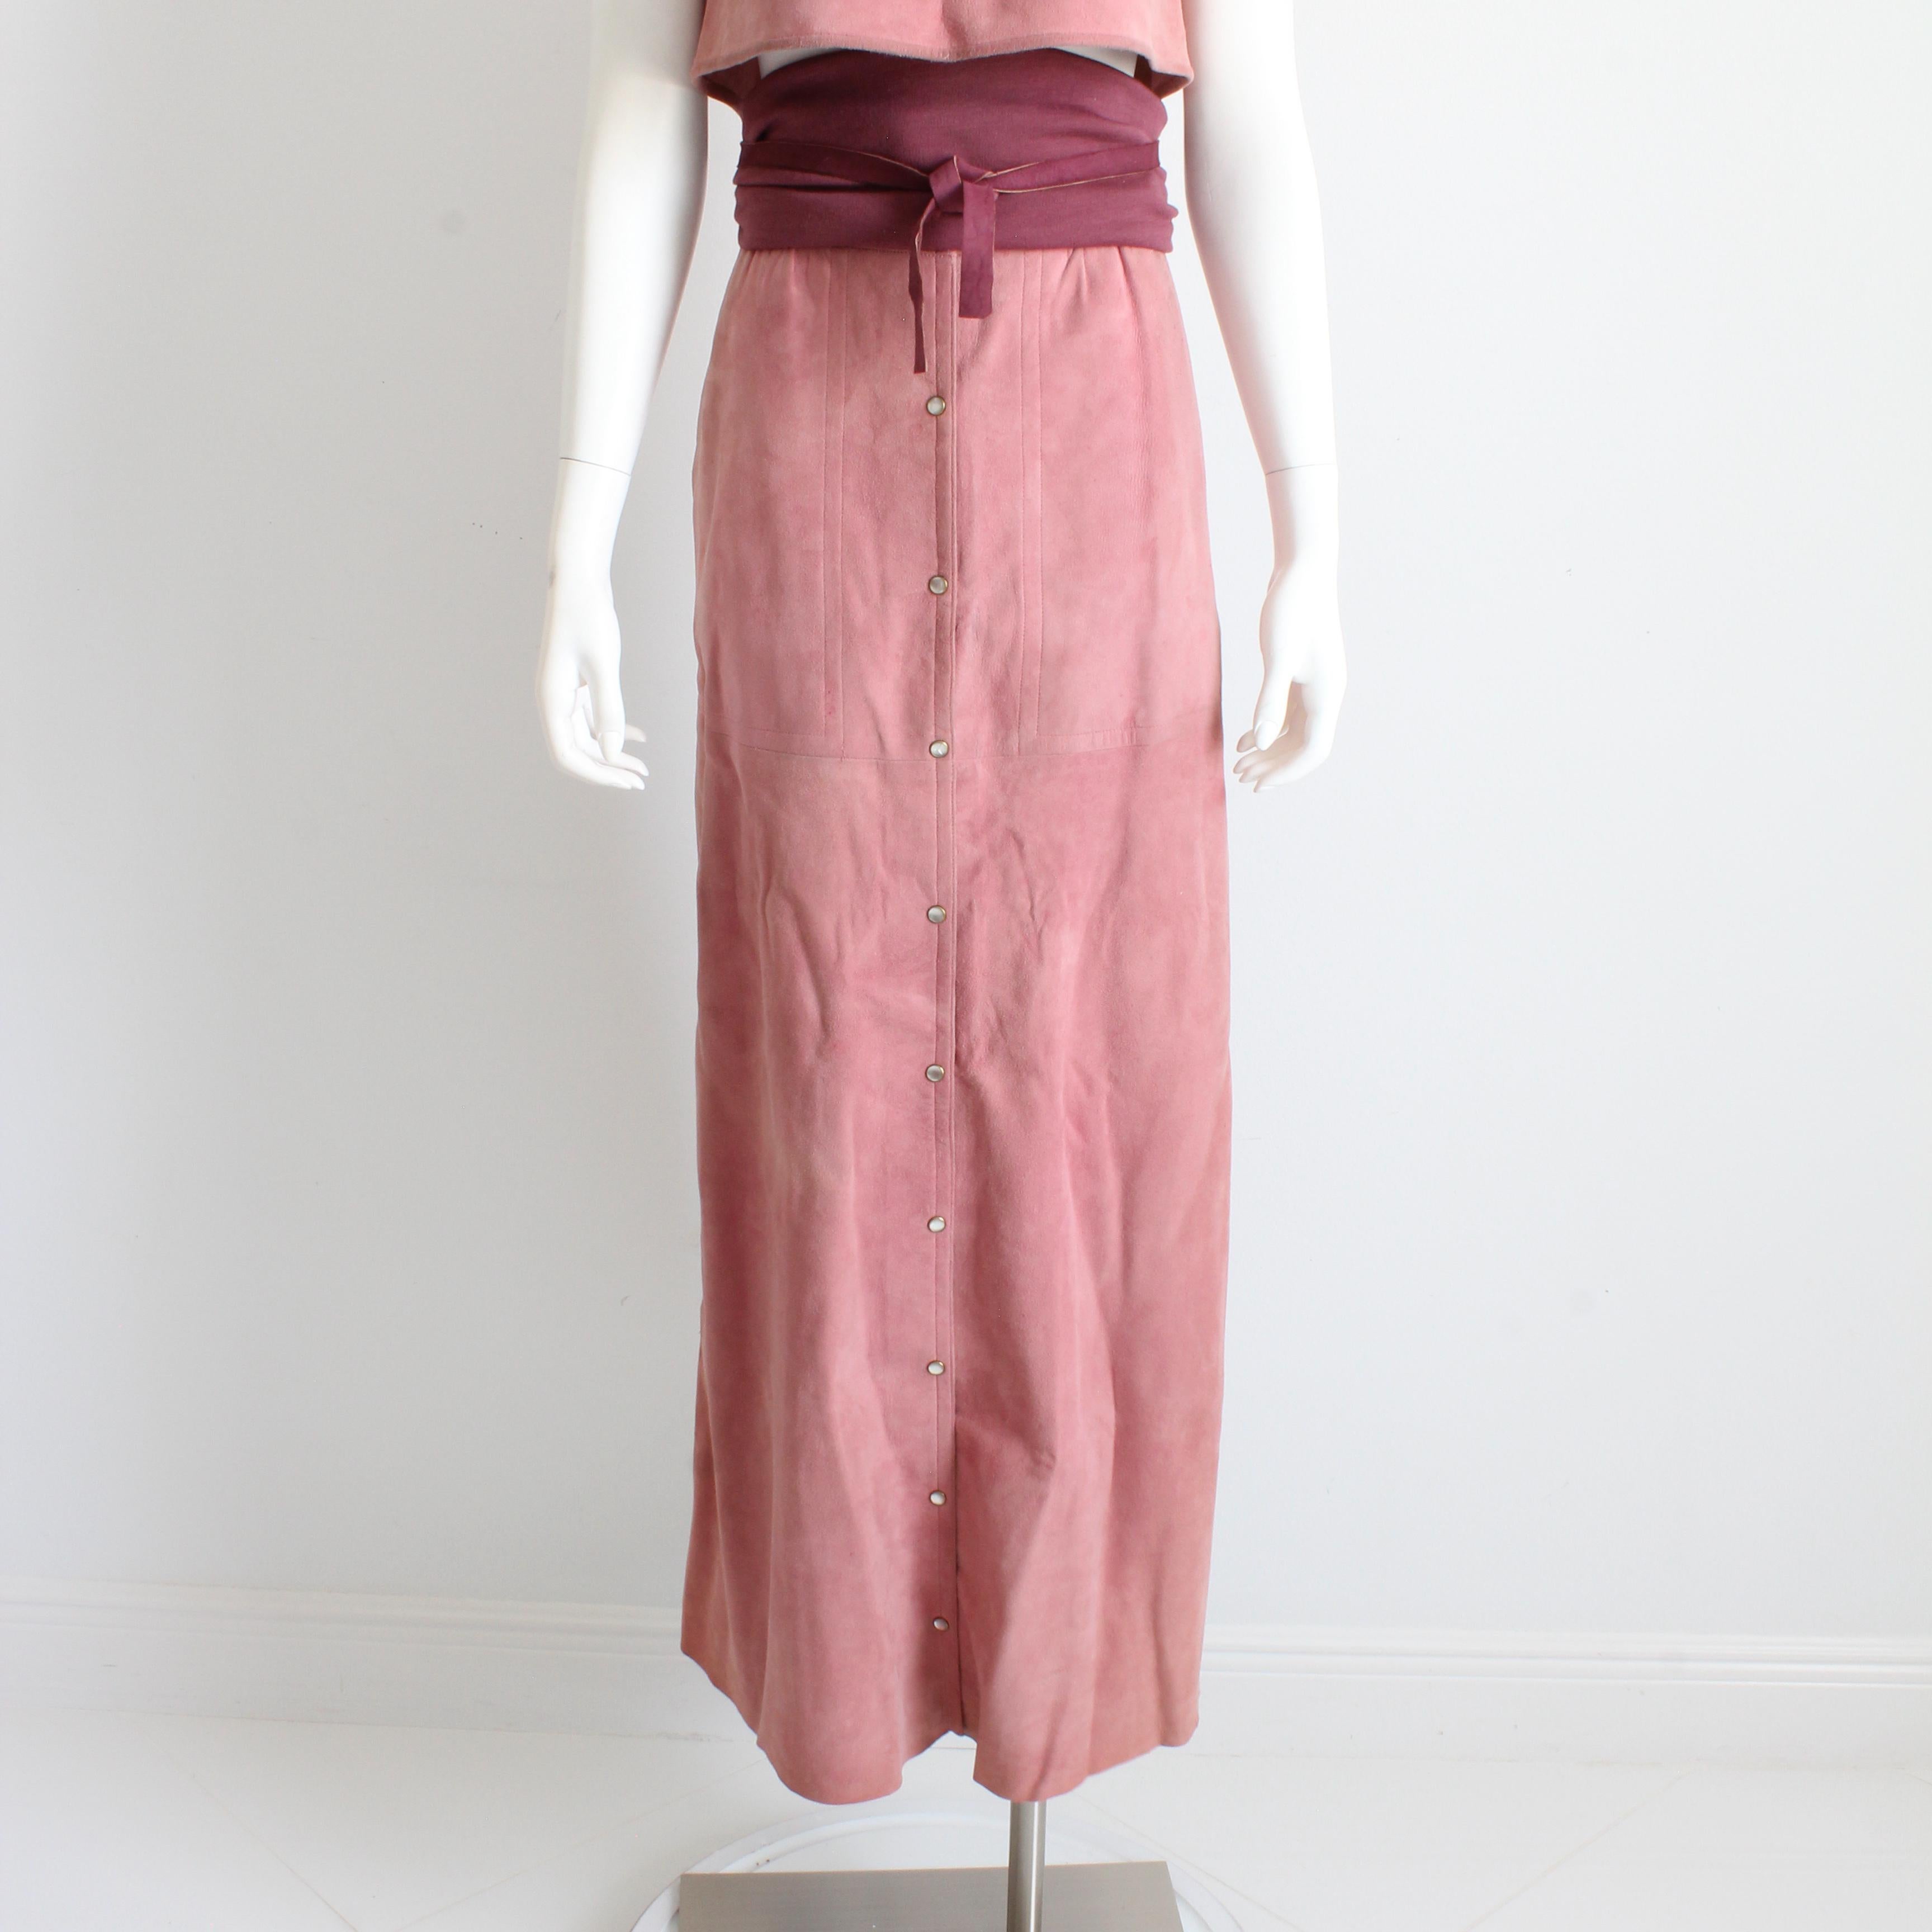 Bonnie Cashin for Sills Pale Pink Suede Skirt Set 3pc Top Skirt and Belt Rare S For Sale 8